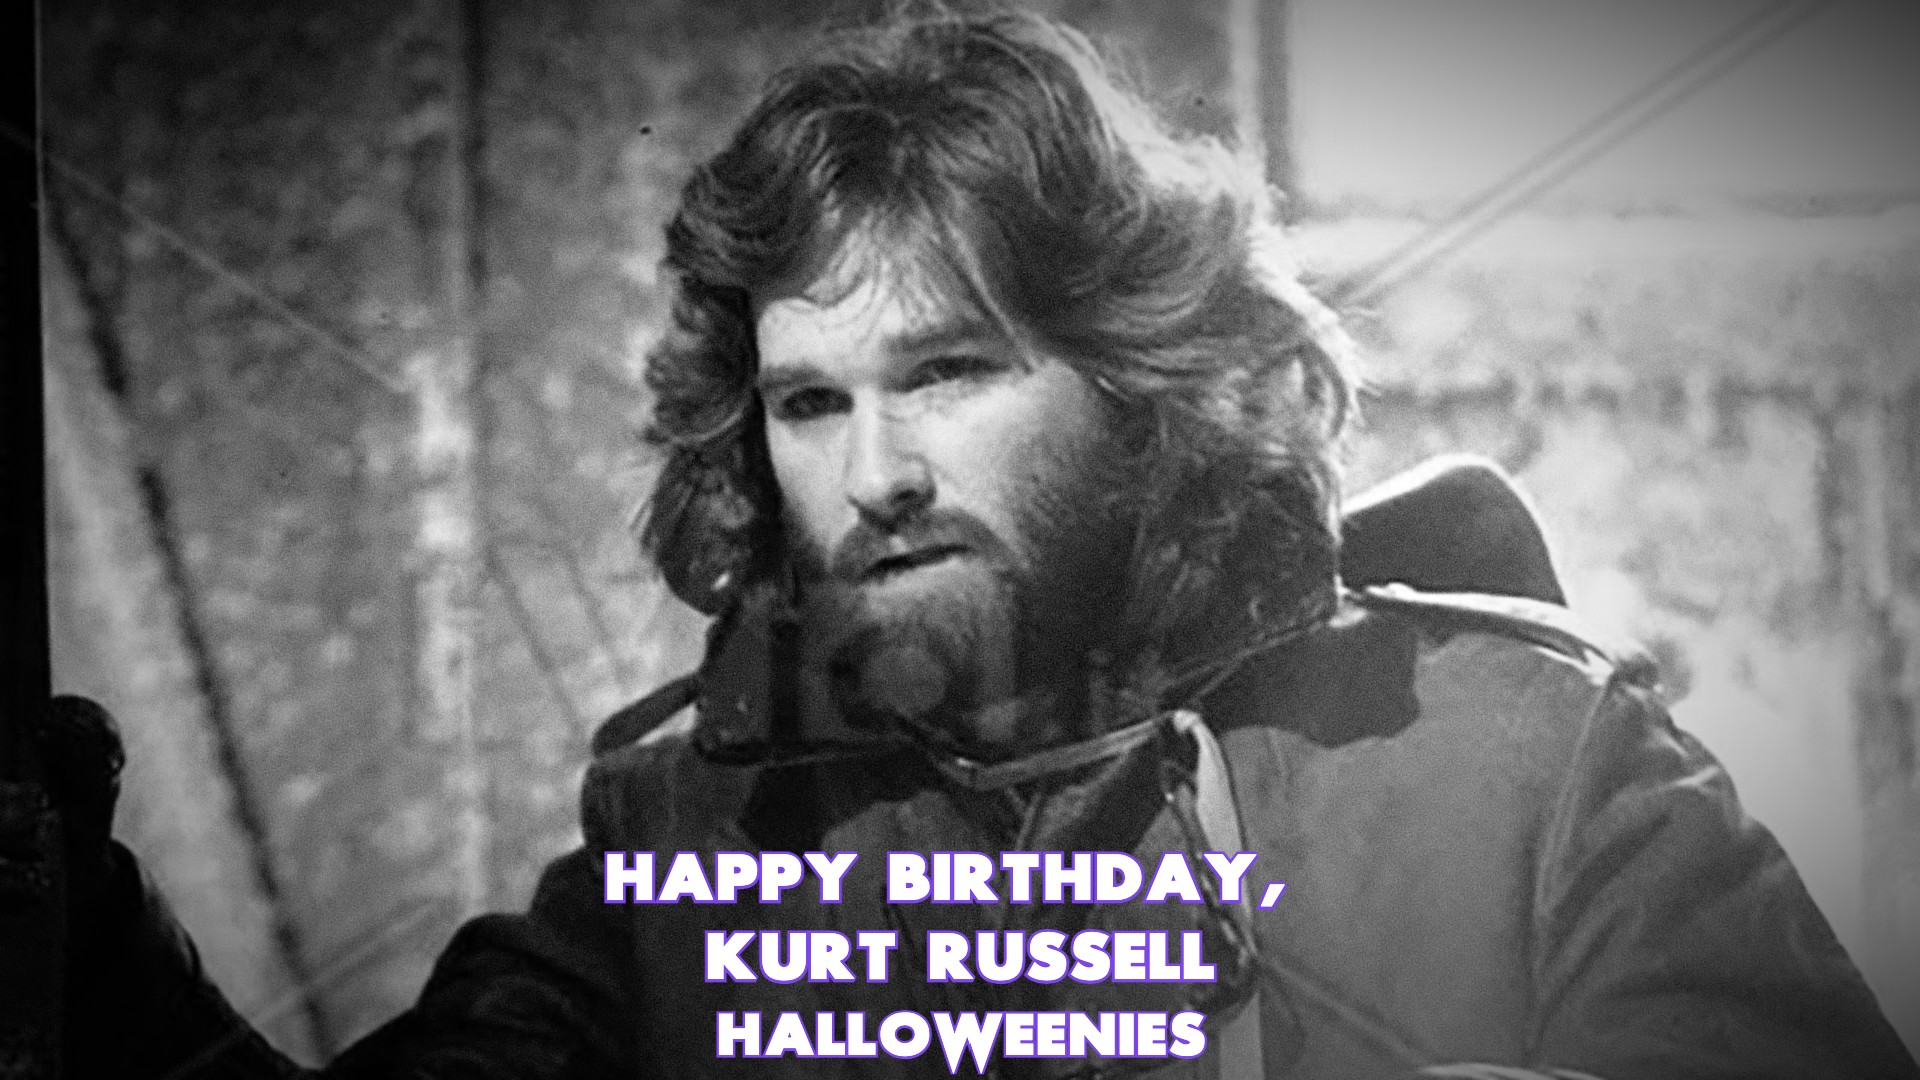 Pour some J&B and wish Kurt Russell a big ol\ Happy Birthday! What\s your favorite role of his? 